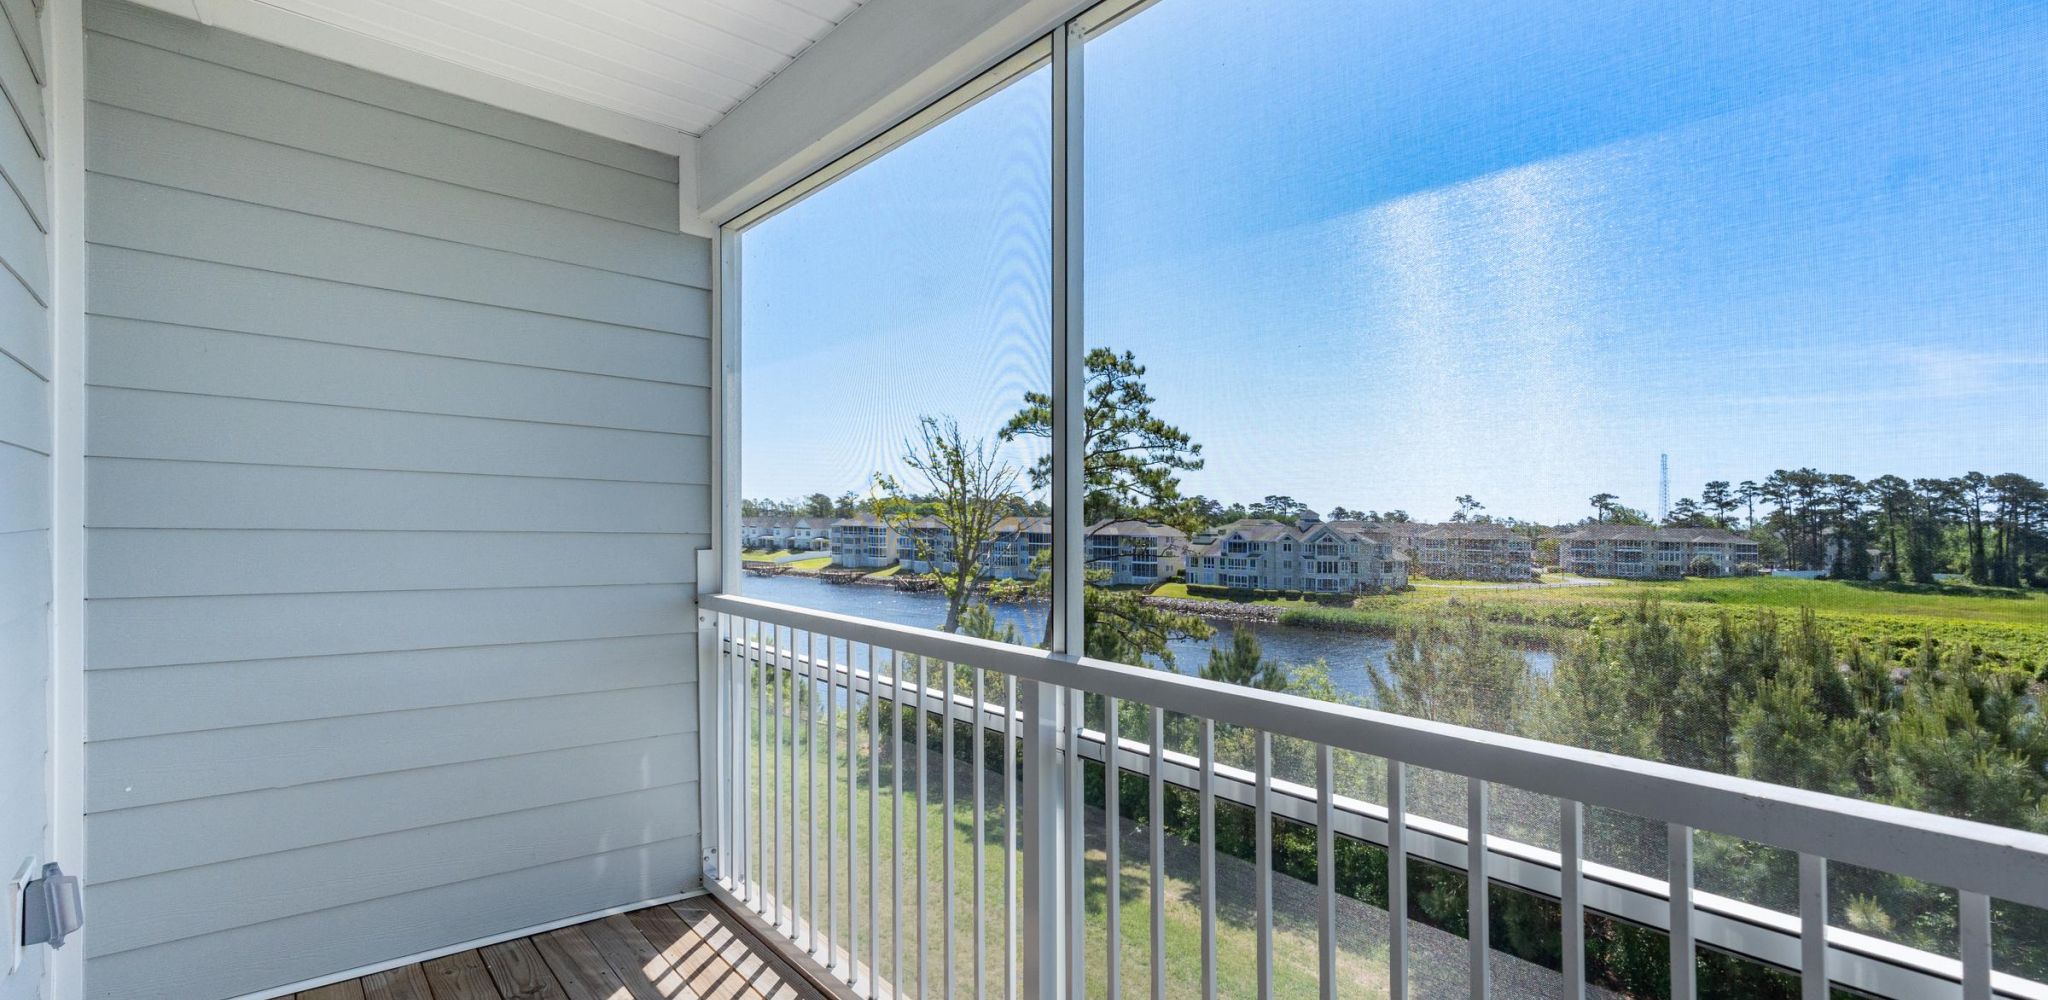 Hawthorne Waterway screened balcony overlooking a serene waterway with distant houses.